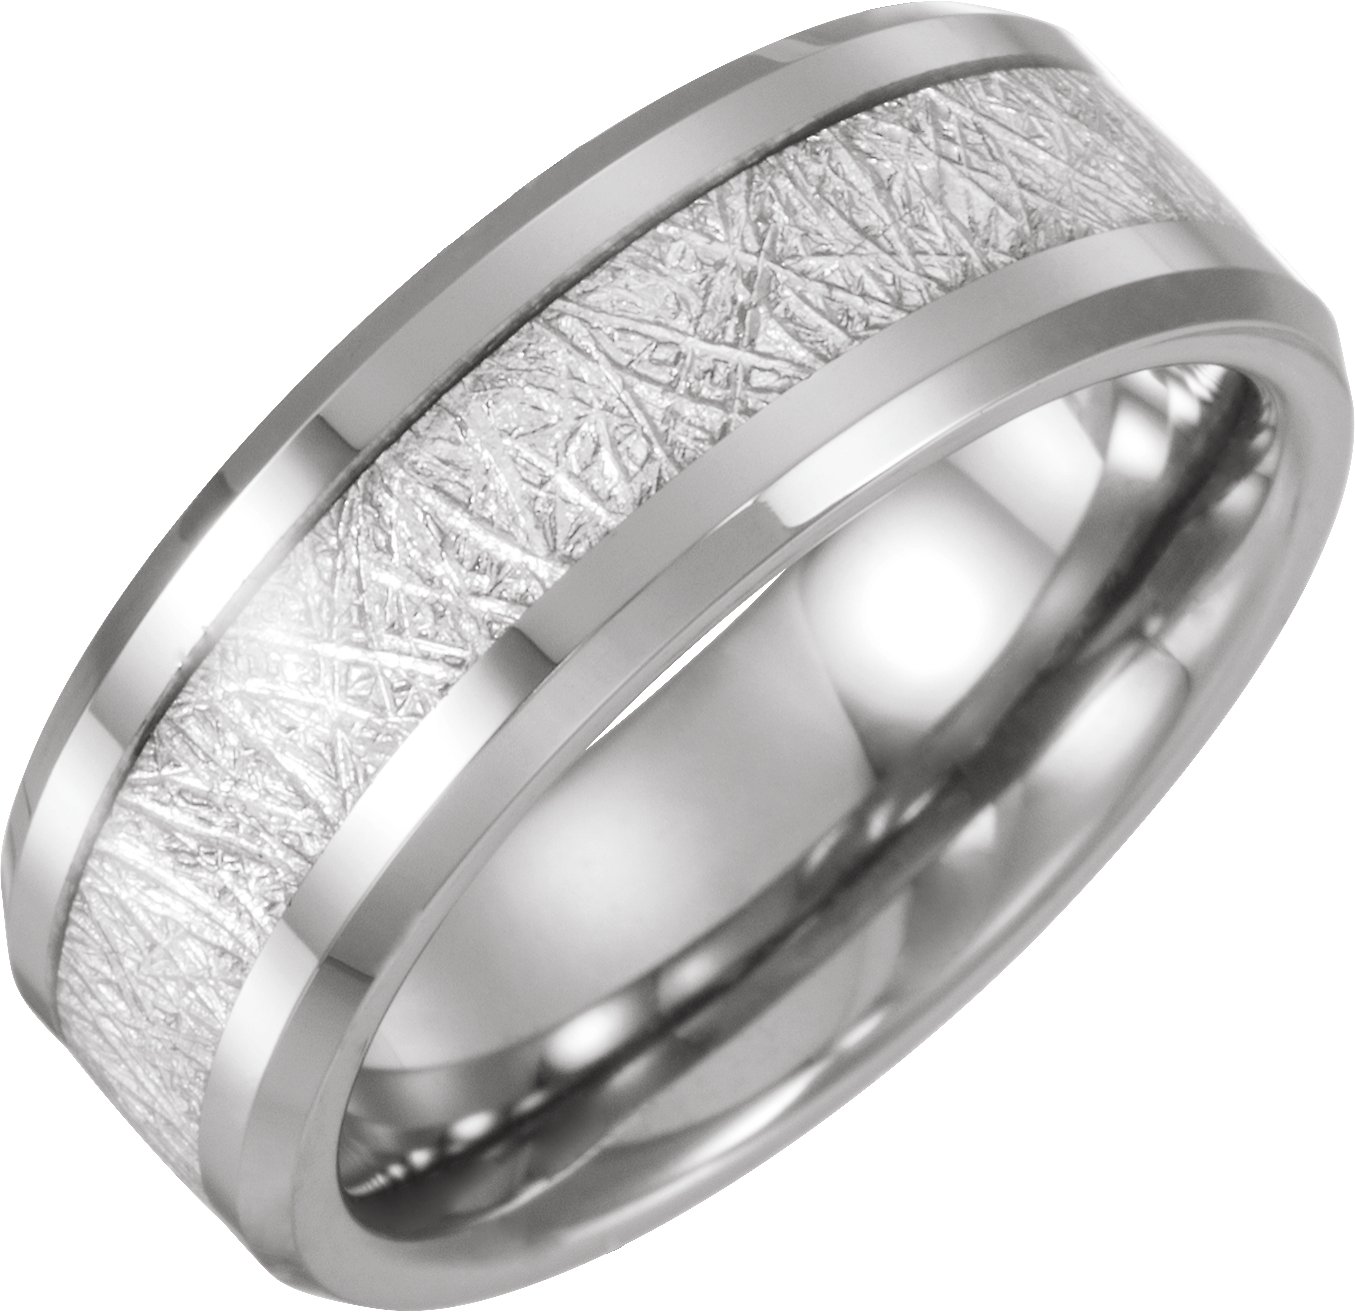 Tungsten Band with Imitation Meteorite Inlay Size 13.5